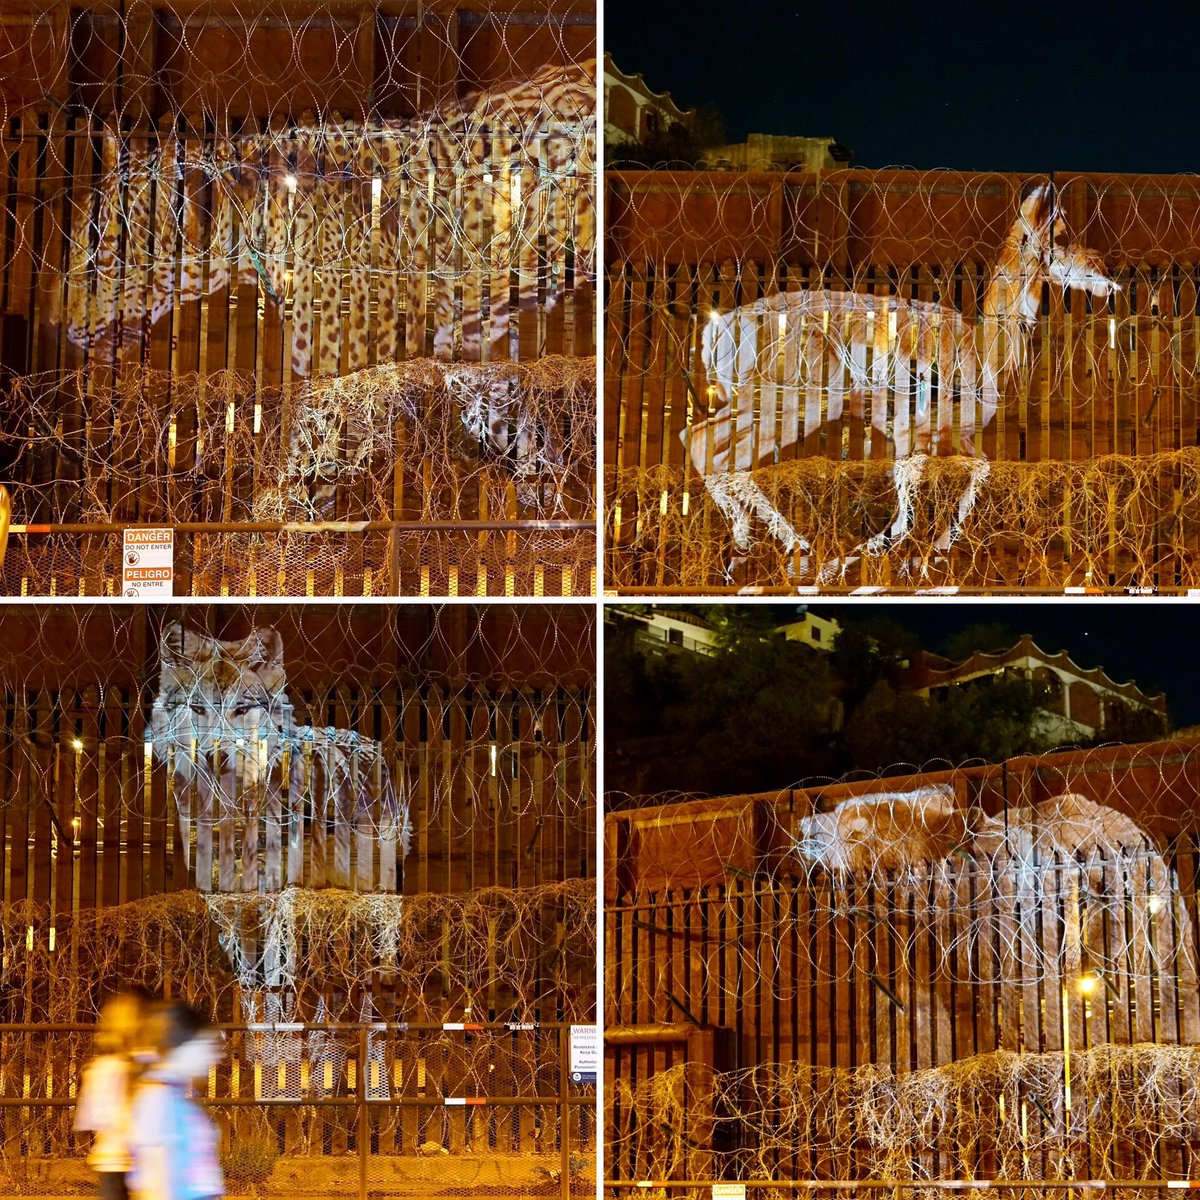 Last week artist Lauren Strohacker projected images of borderlands wildlife harmed by border policies on the wall in Nogales, Ariz. The images capture the beauty and cruelty present in the borderlands. website: laurenstrohacker.org Twitter: @StrohackerArt